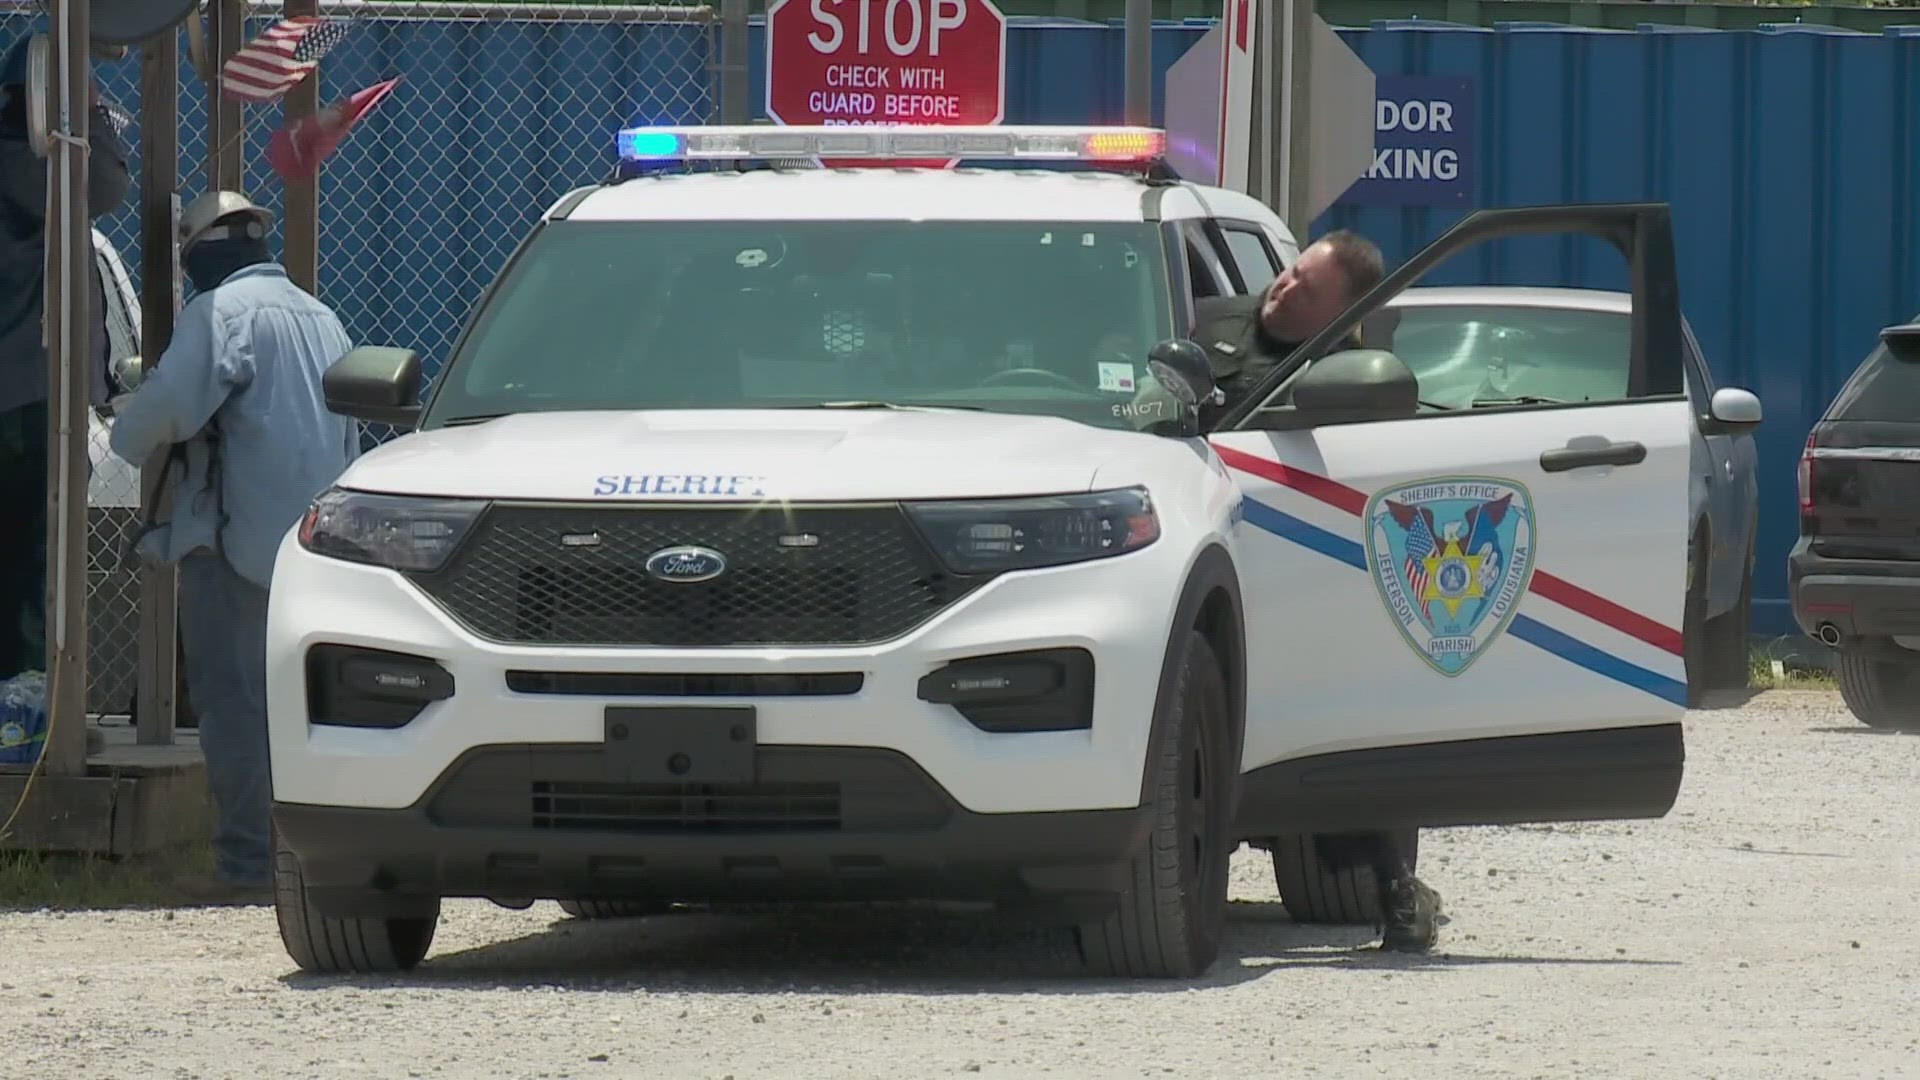 The suspect was killed following a shootout with officers 3 miles away from the shipyards.